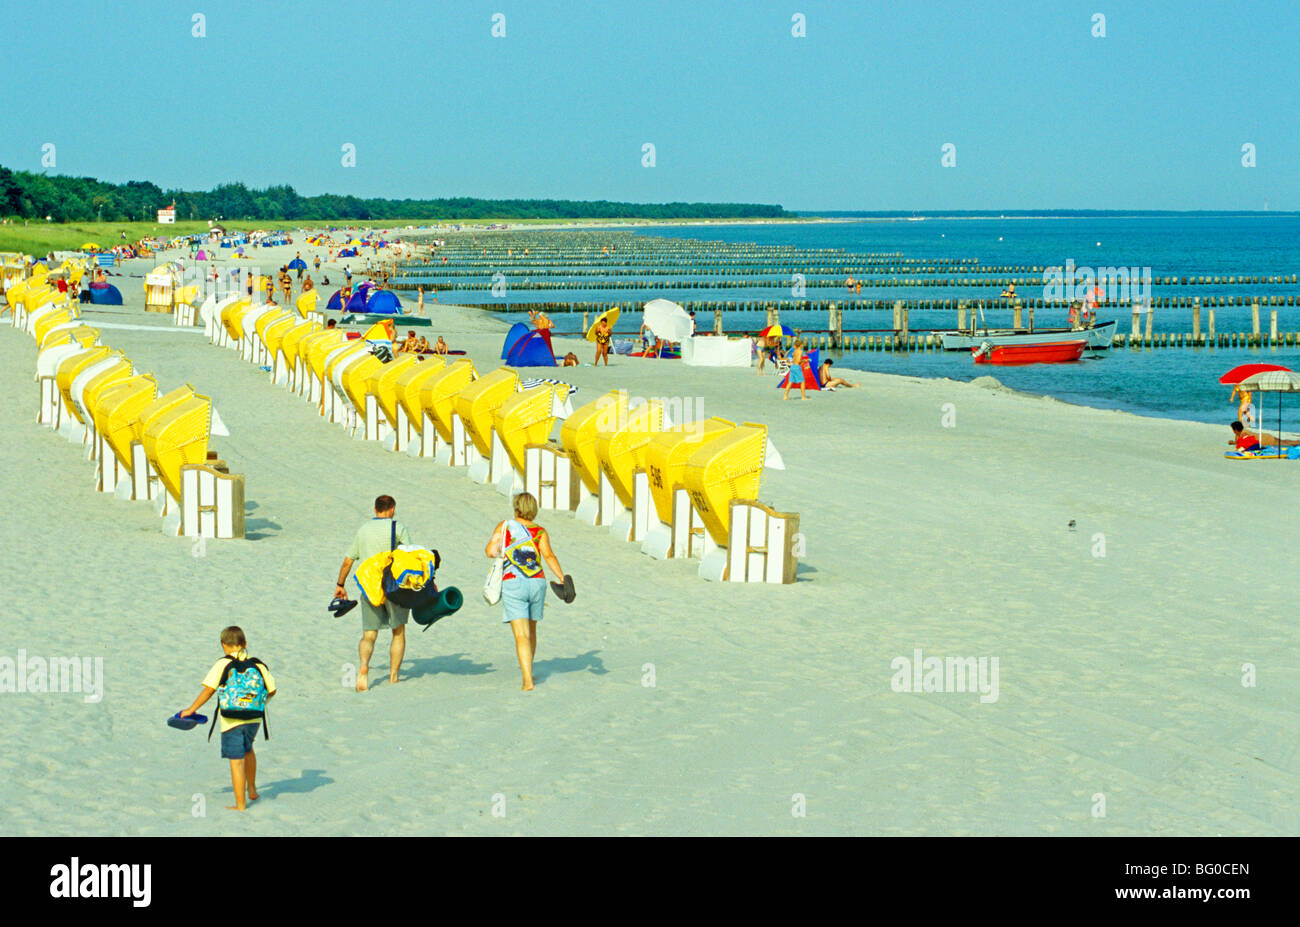 sandy beach with basket chairs at Zingst, Baltic Sea, Mecklenburg-West Pomerania, Northern Germany Stock Photo